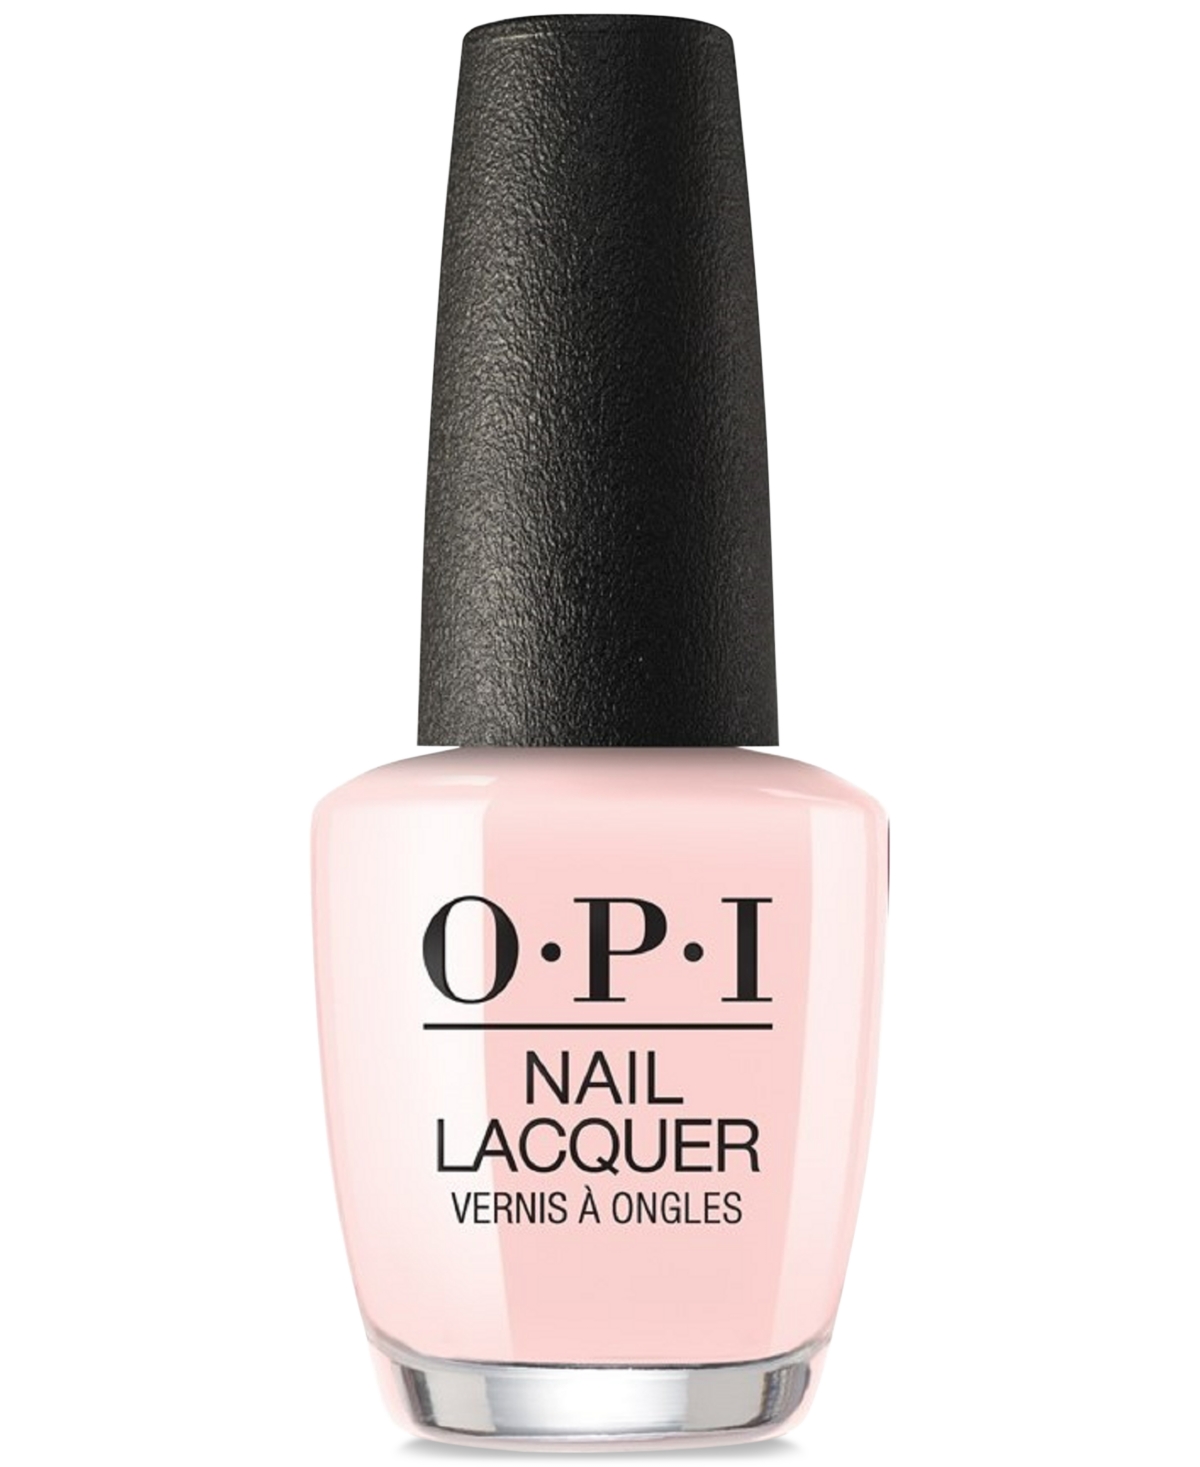 Opi Nail Lacquer In Lacquer Passion